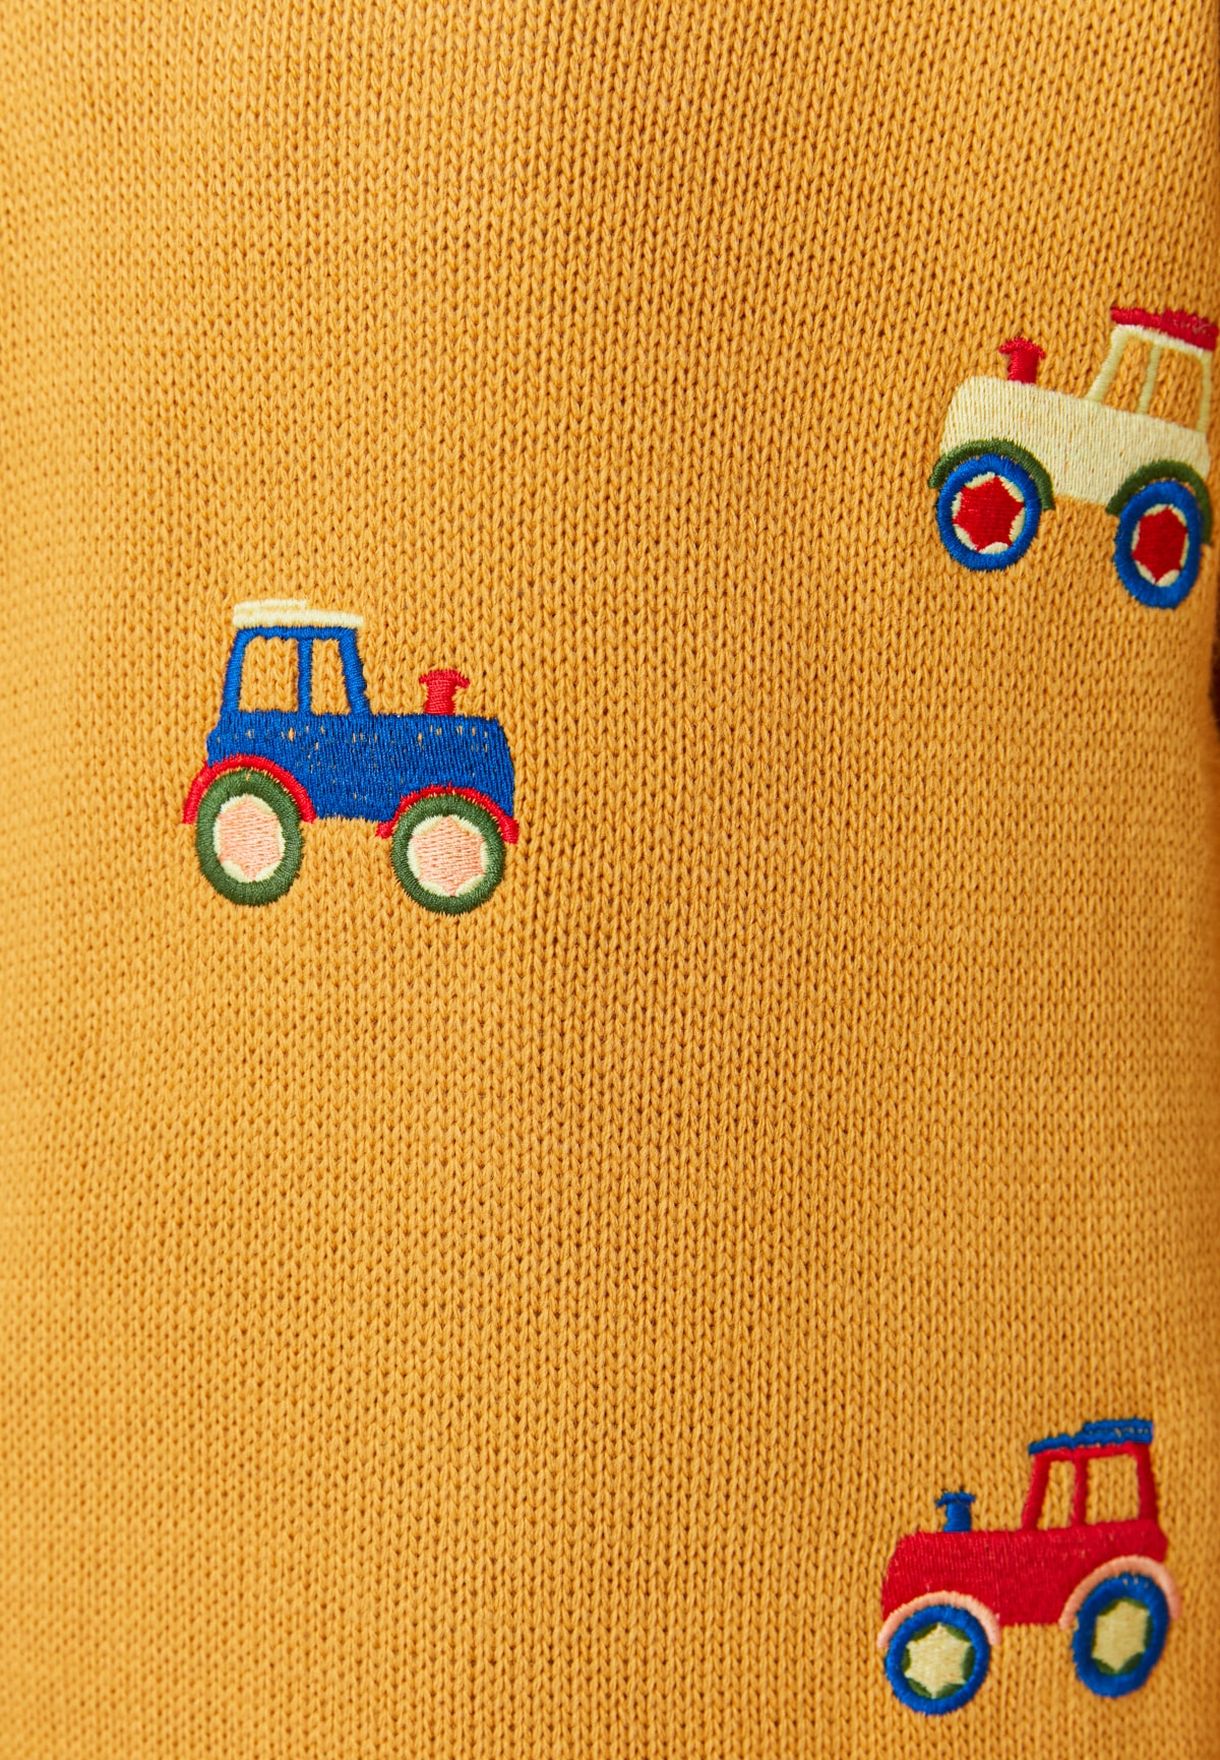 Kids Embroidered Car Knitted Sweater